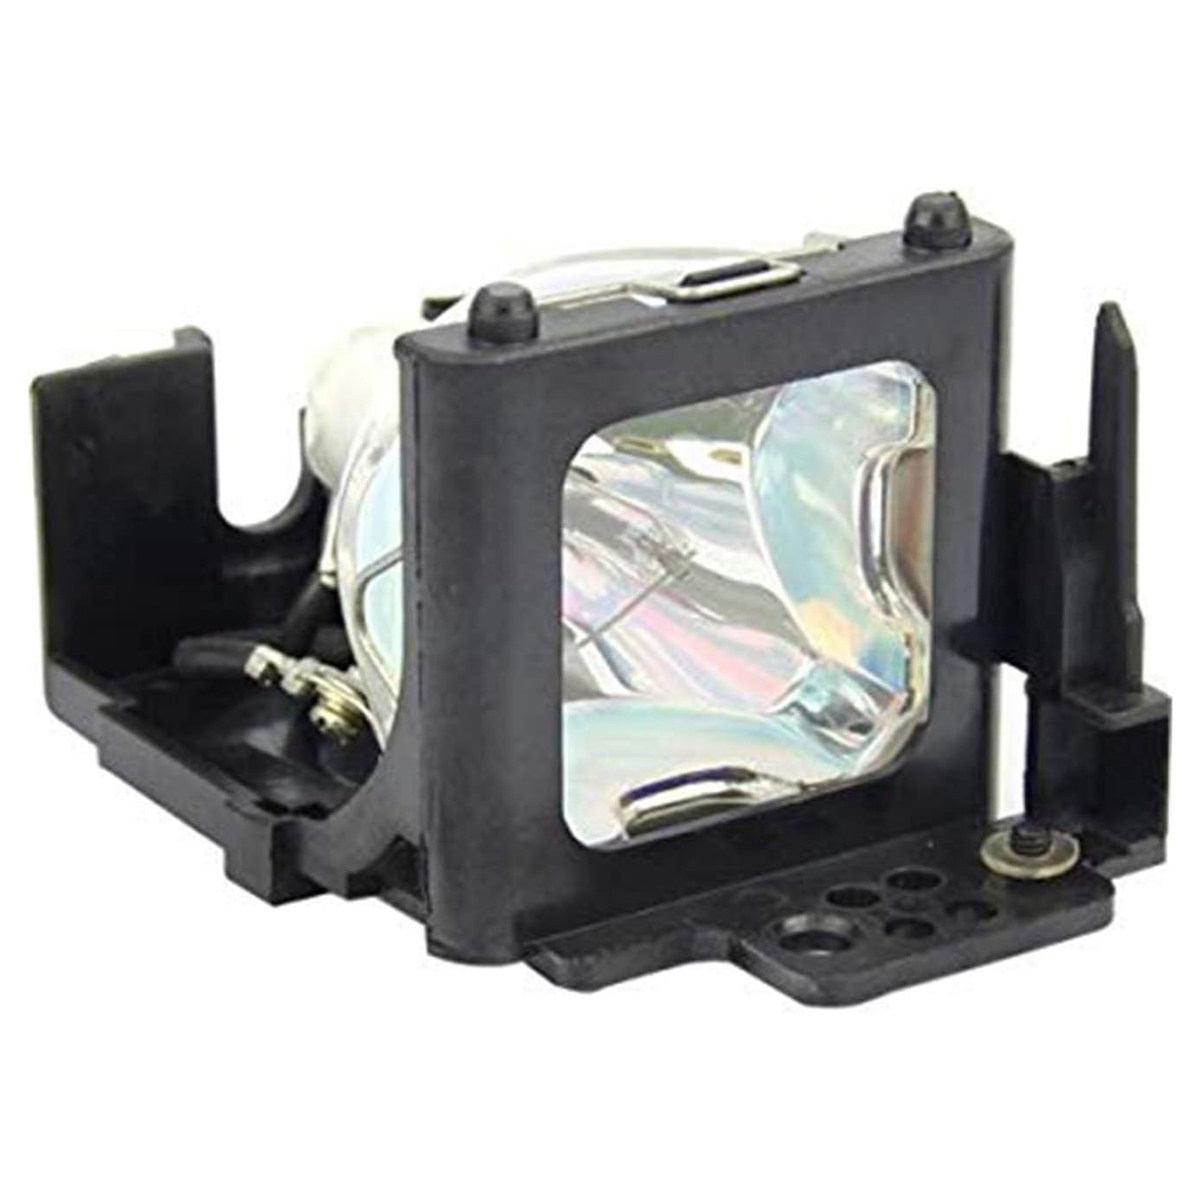 Replacement Projector lamp DT00401 For Hitachi CP-HS1000 CP-HS1050 CP-HS1060 CP-HX1095